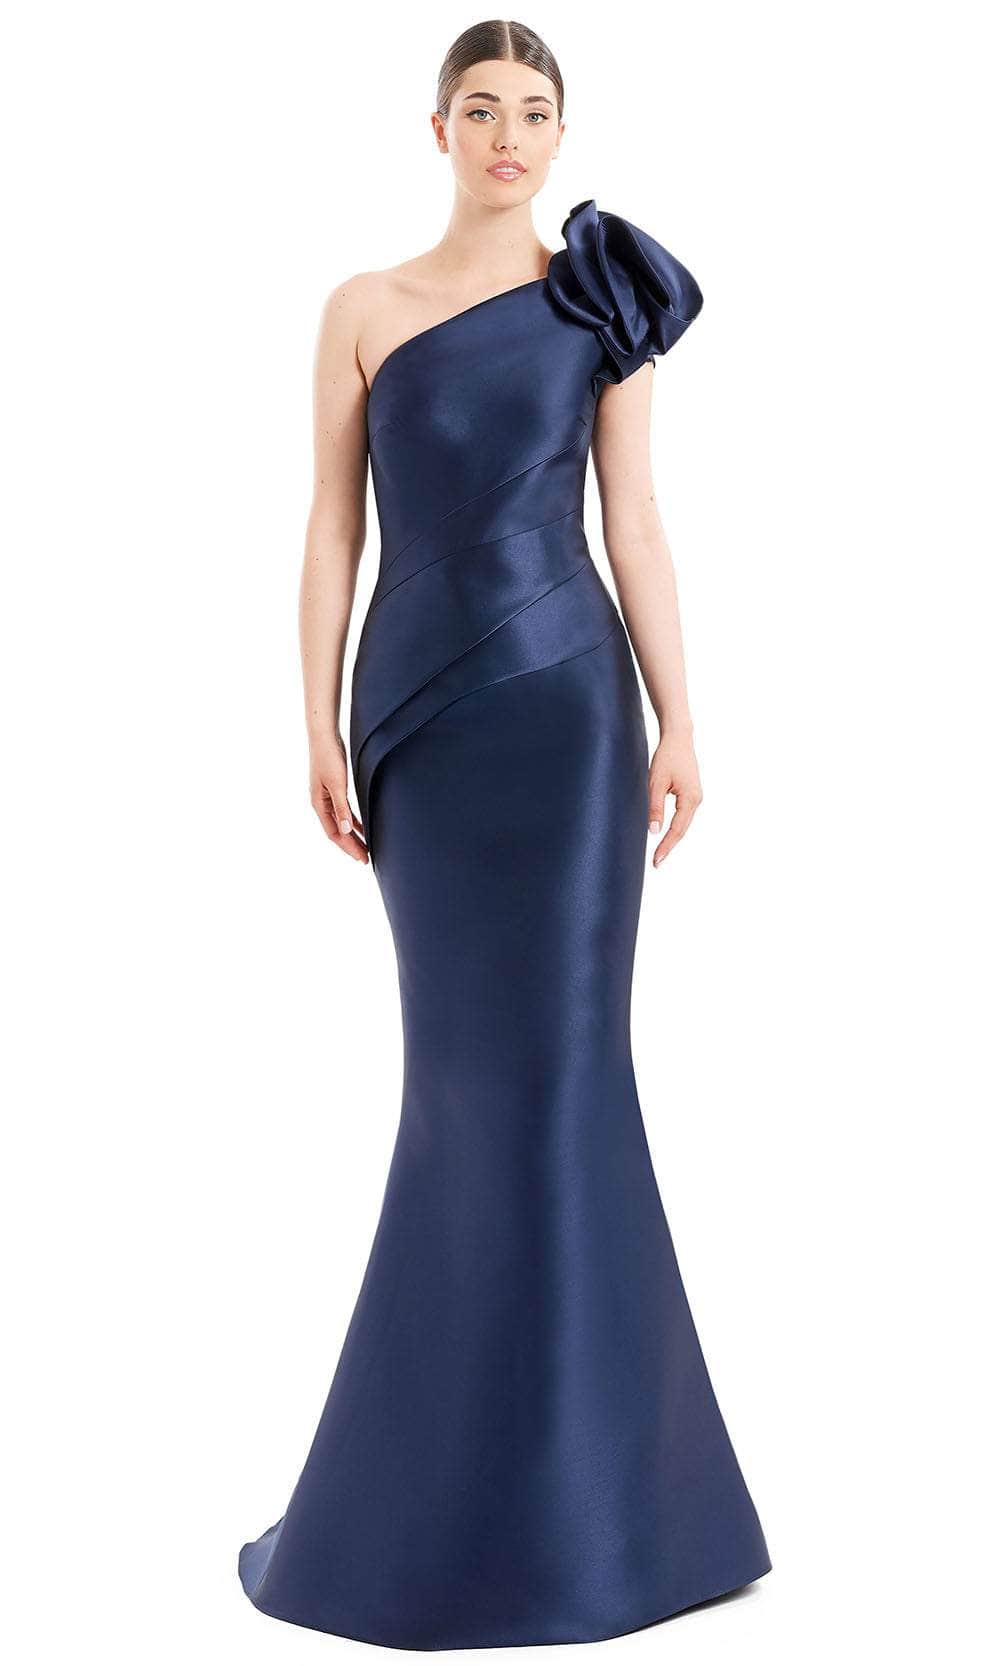 Alexander By Daymor 1673F22 - Asymmetric Pleated Peplum Evening Gown Special Occasion Dress 4 / Navy